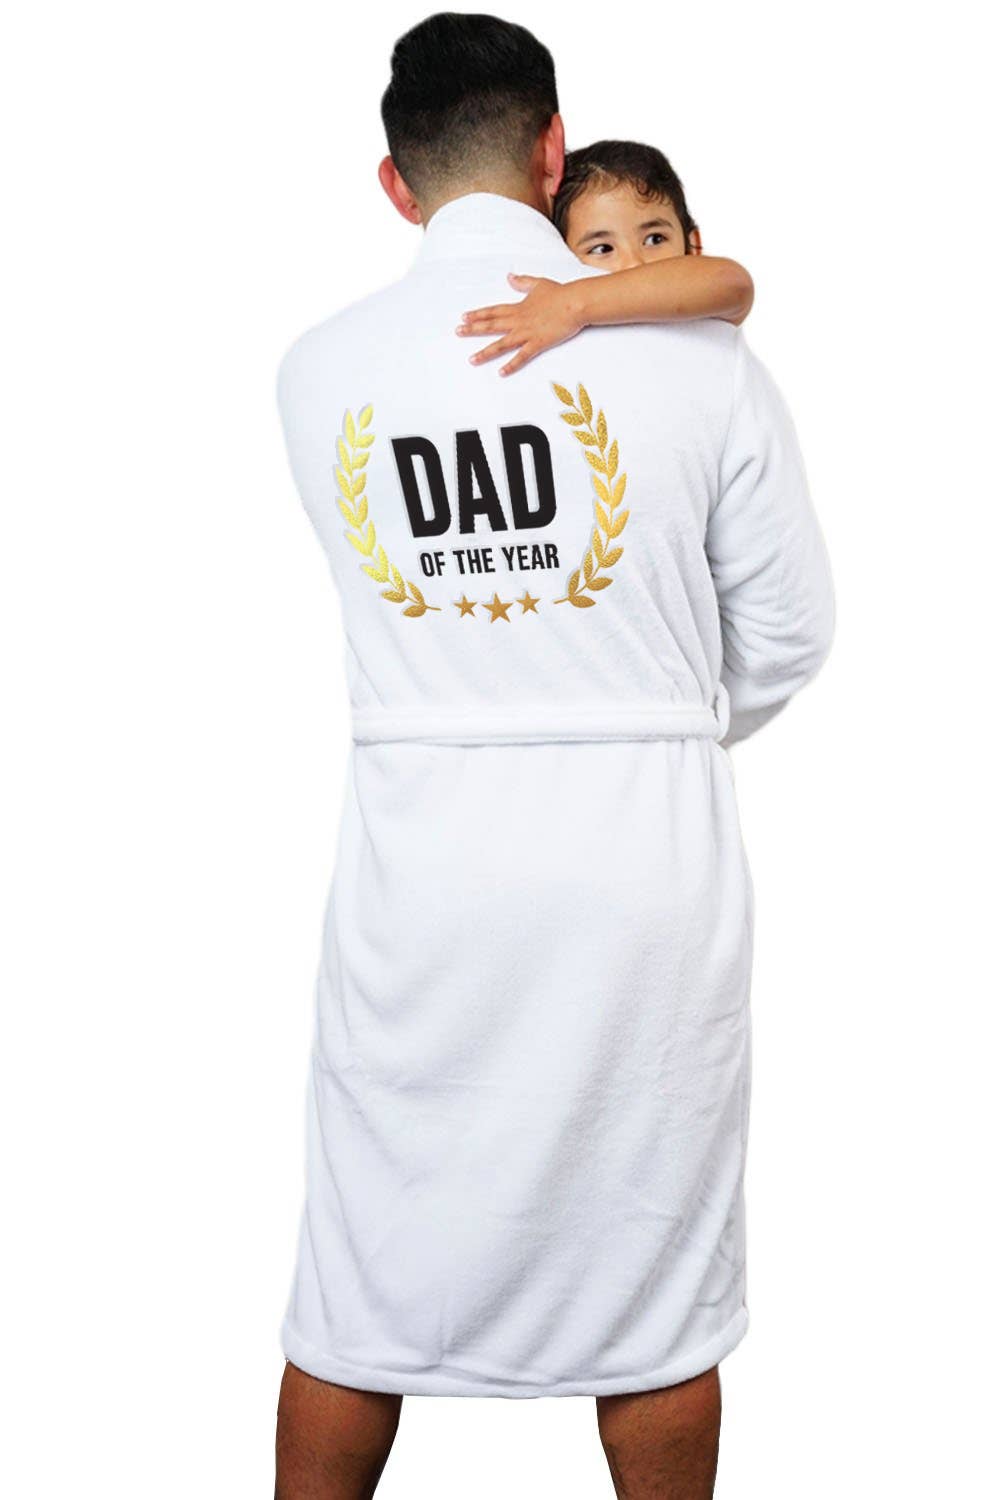 LA Trading Co - LUXE PLUSH ROBE - Dad of the year (White)